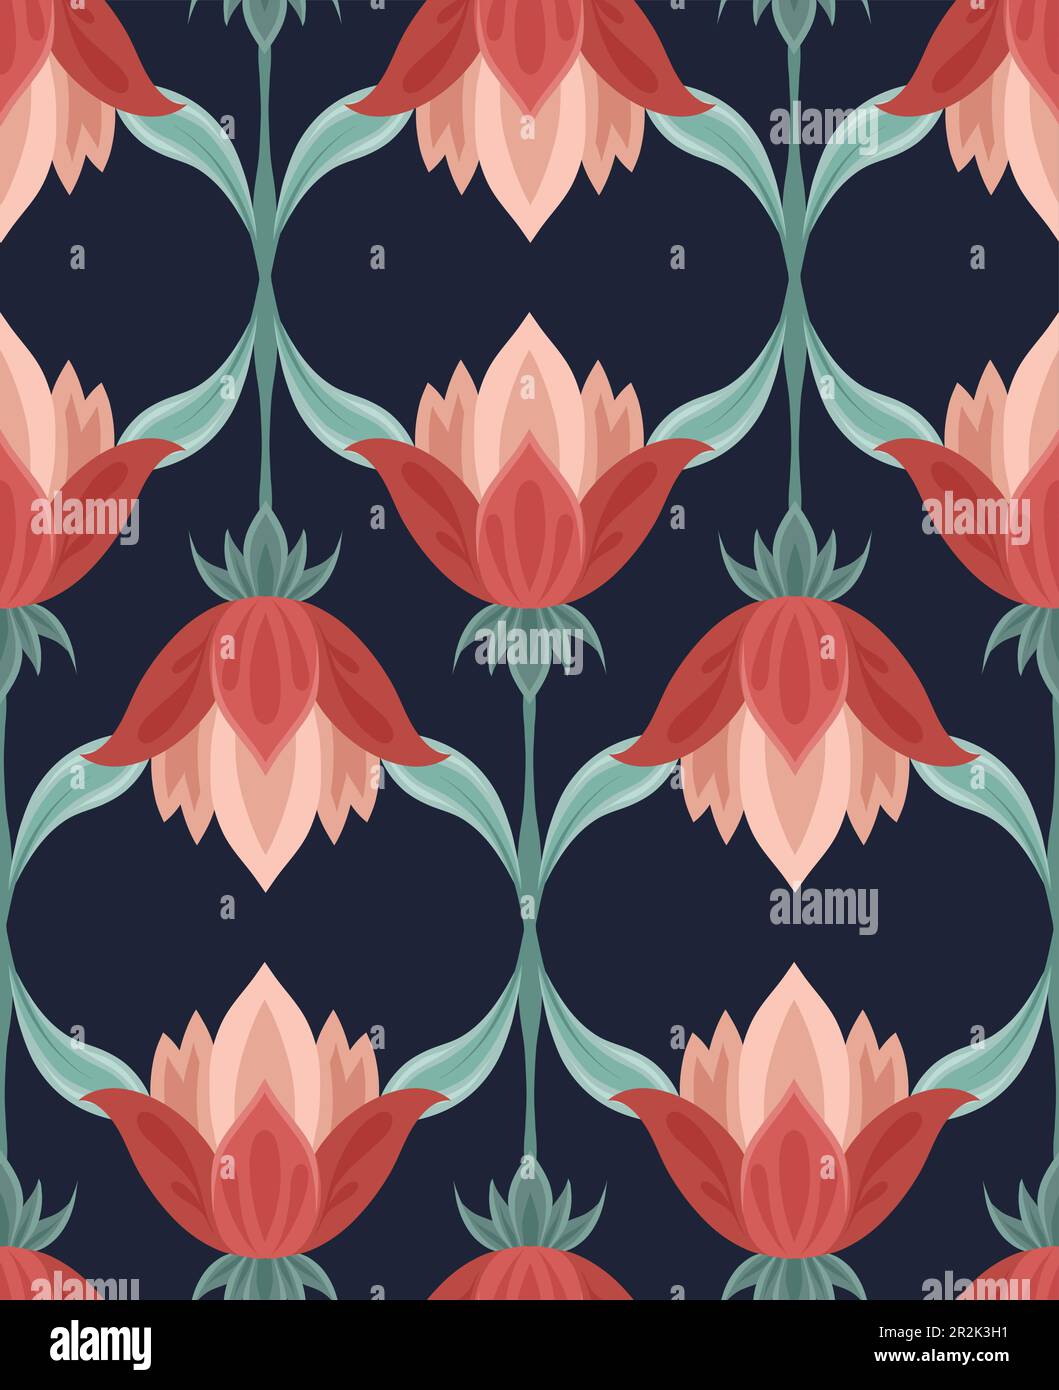 Vector seamless pattern with geometric red flowers on a dark background. Floral folk art texture. Rustic background for fabrics, wallpapers, wrapping Stock Vector